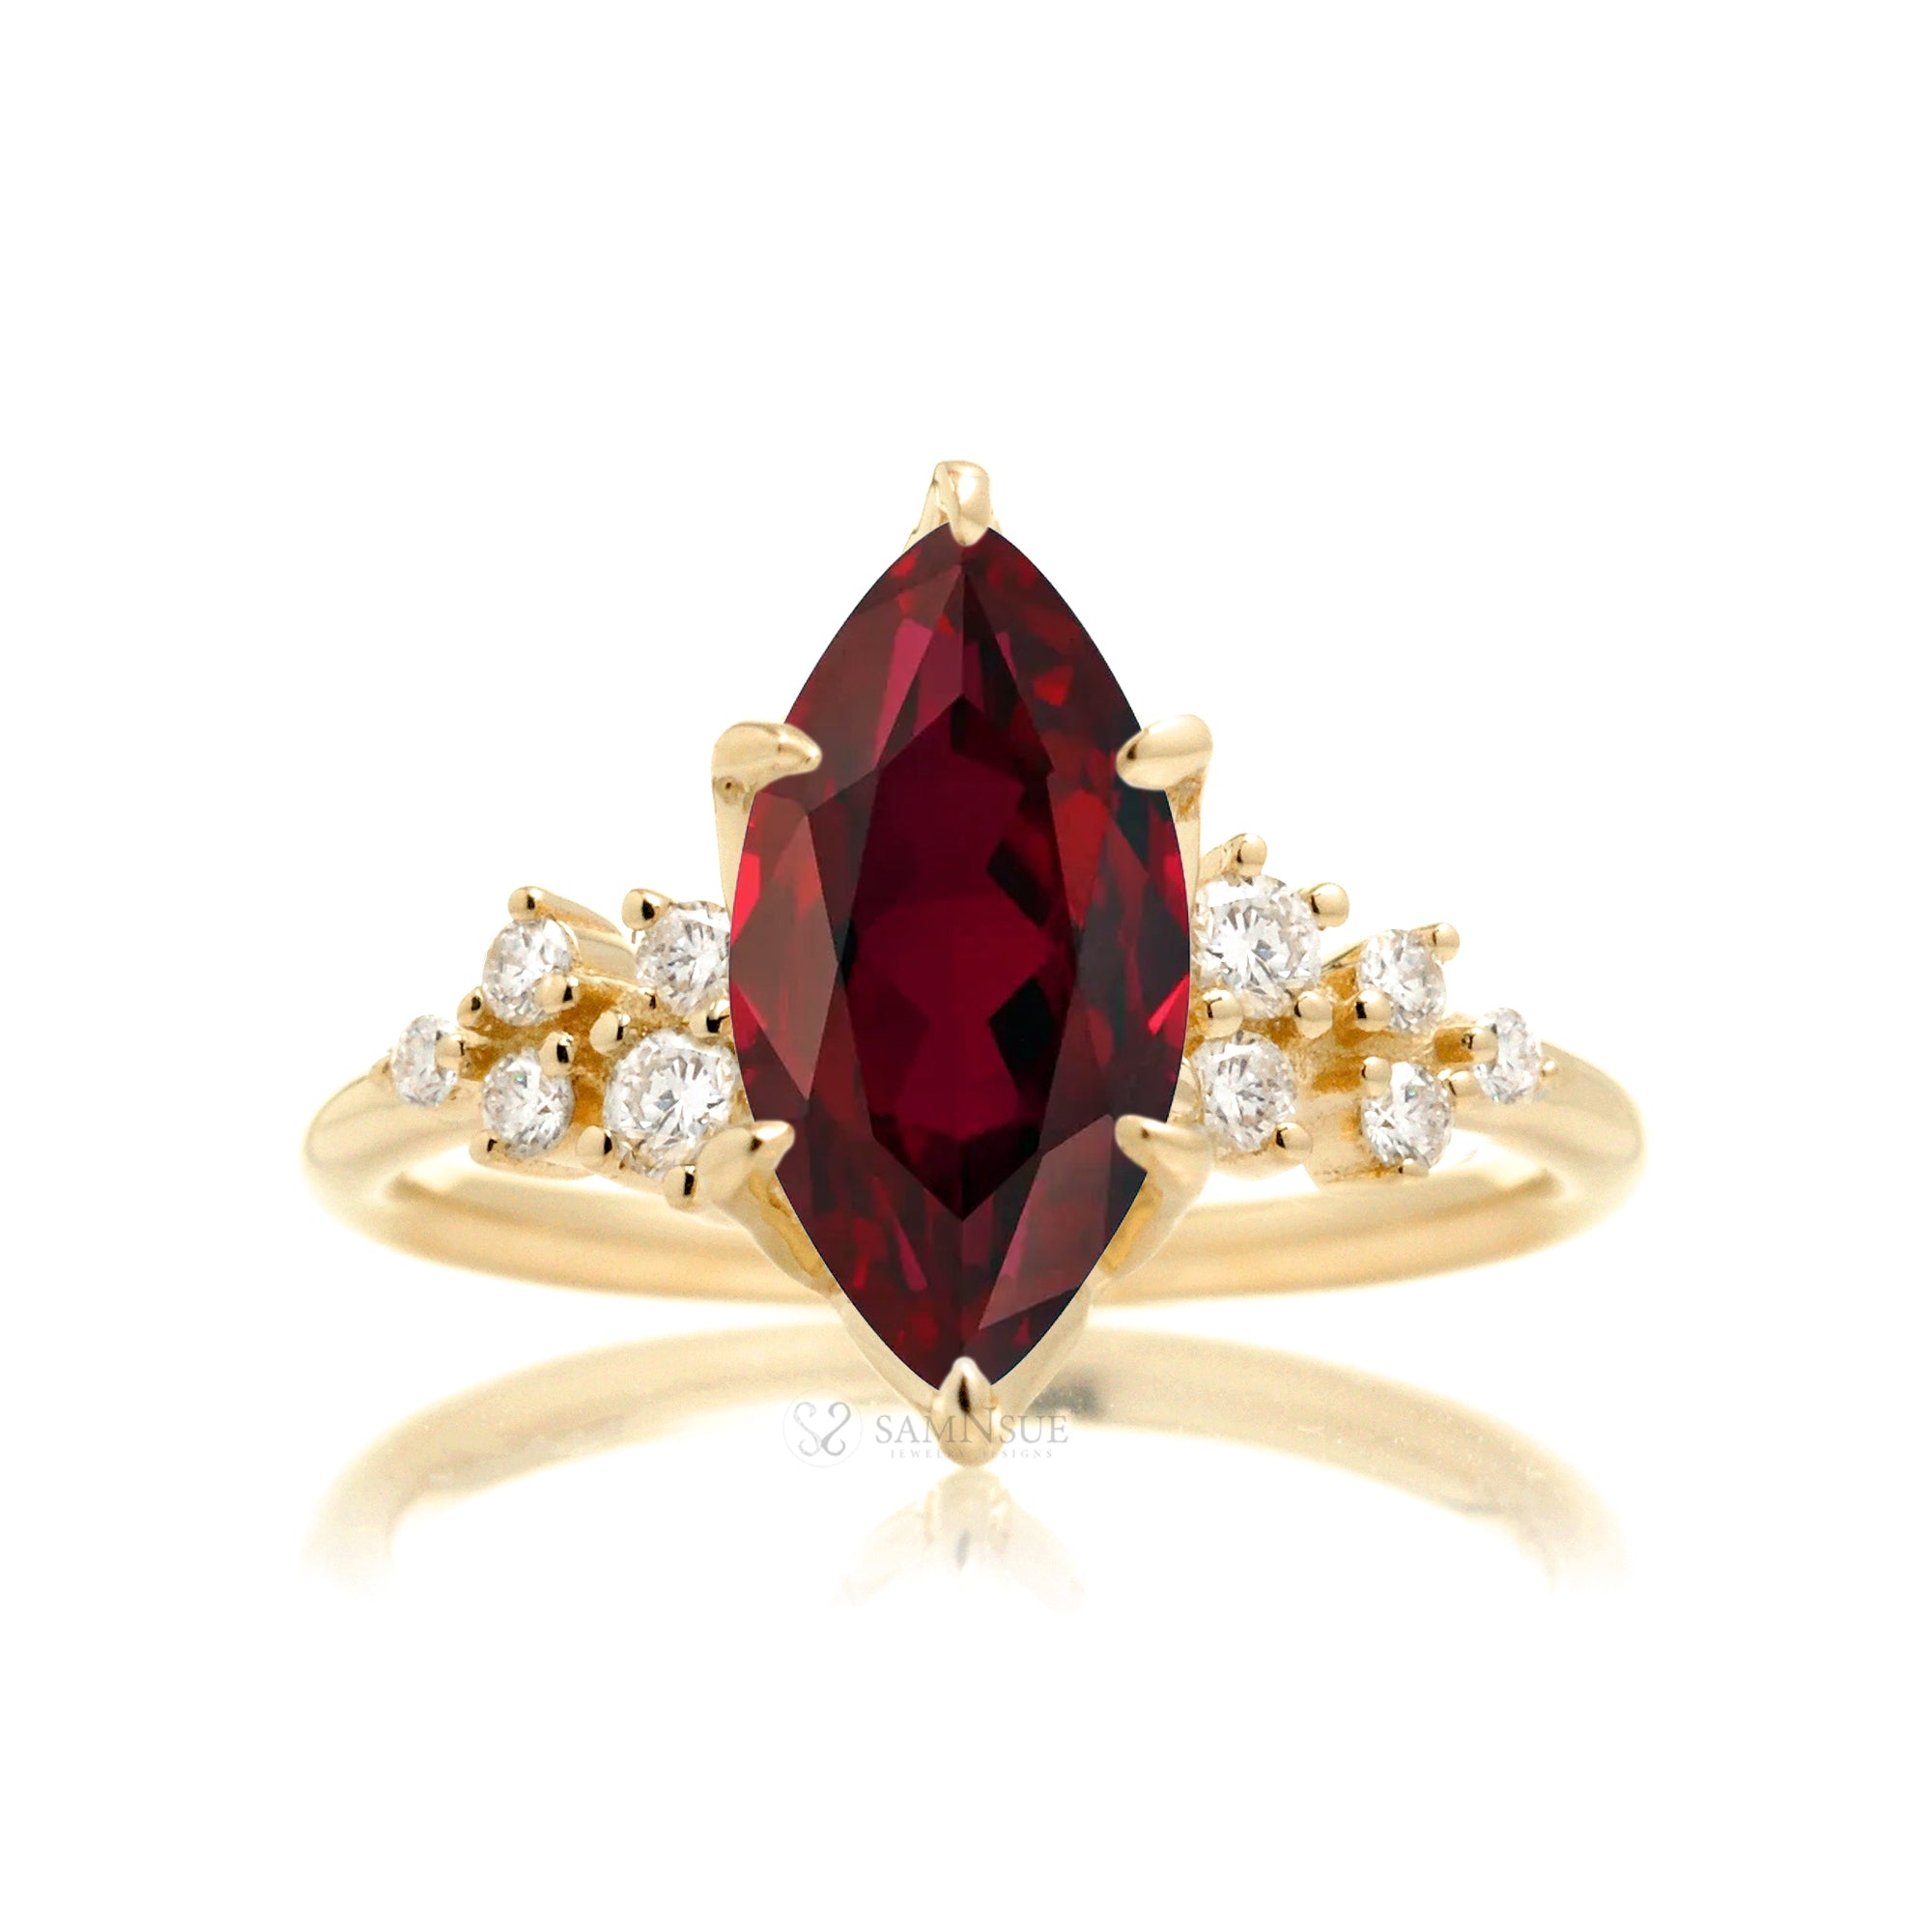 Marquise ruby and diamond solitaire engagement ring in yellow gold